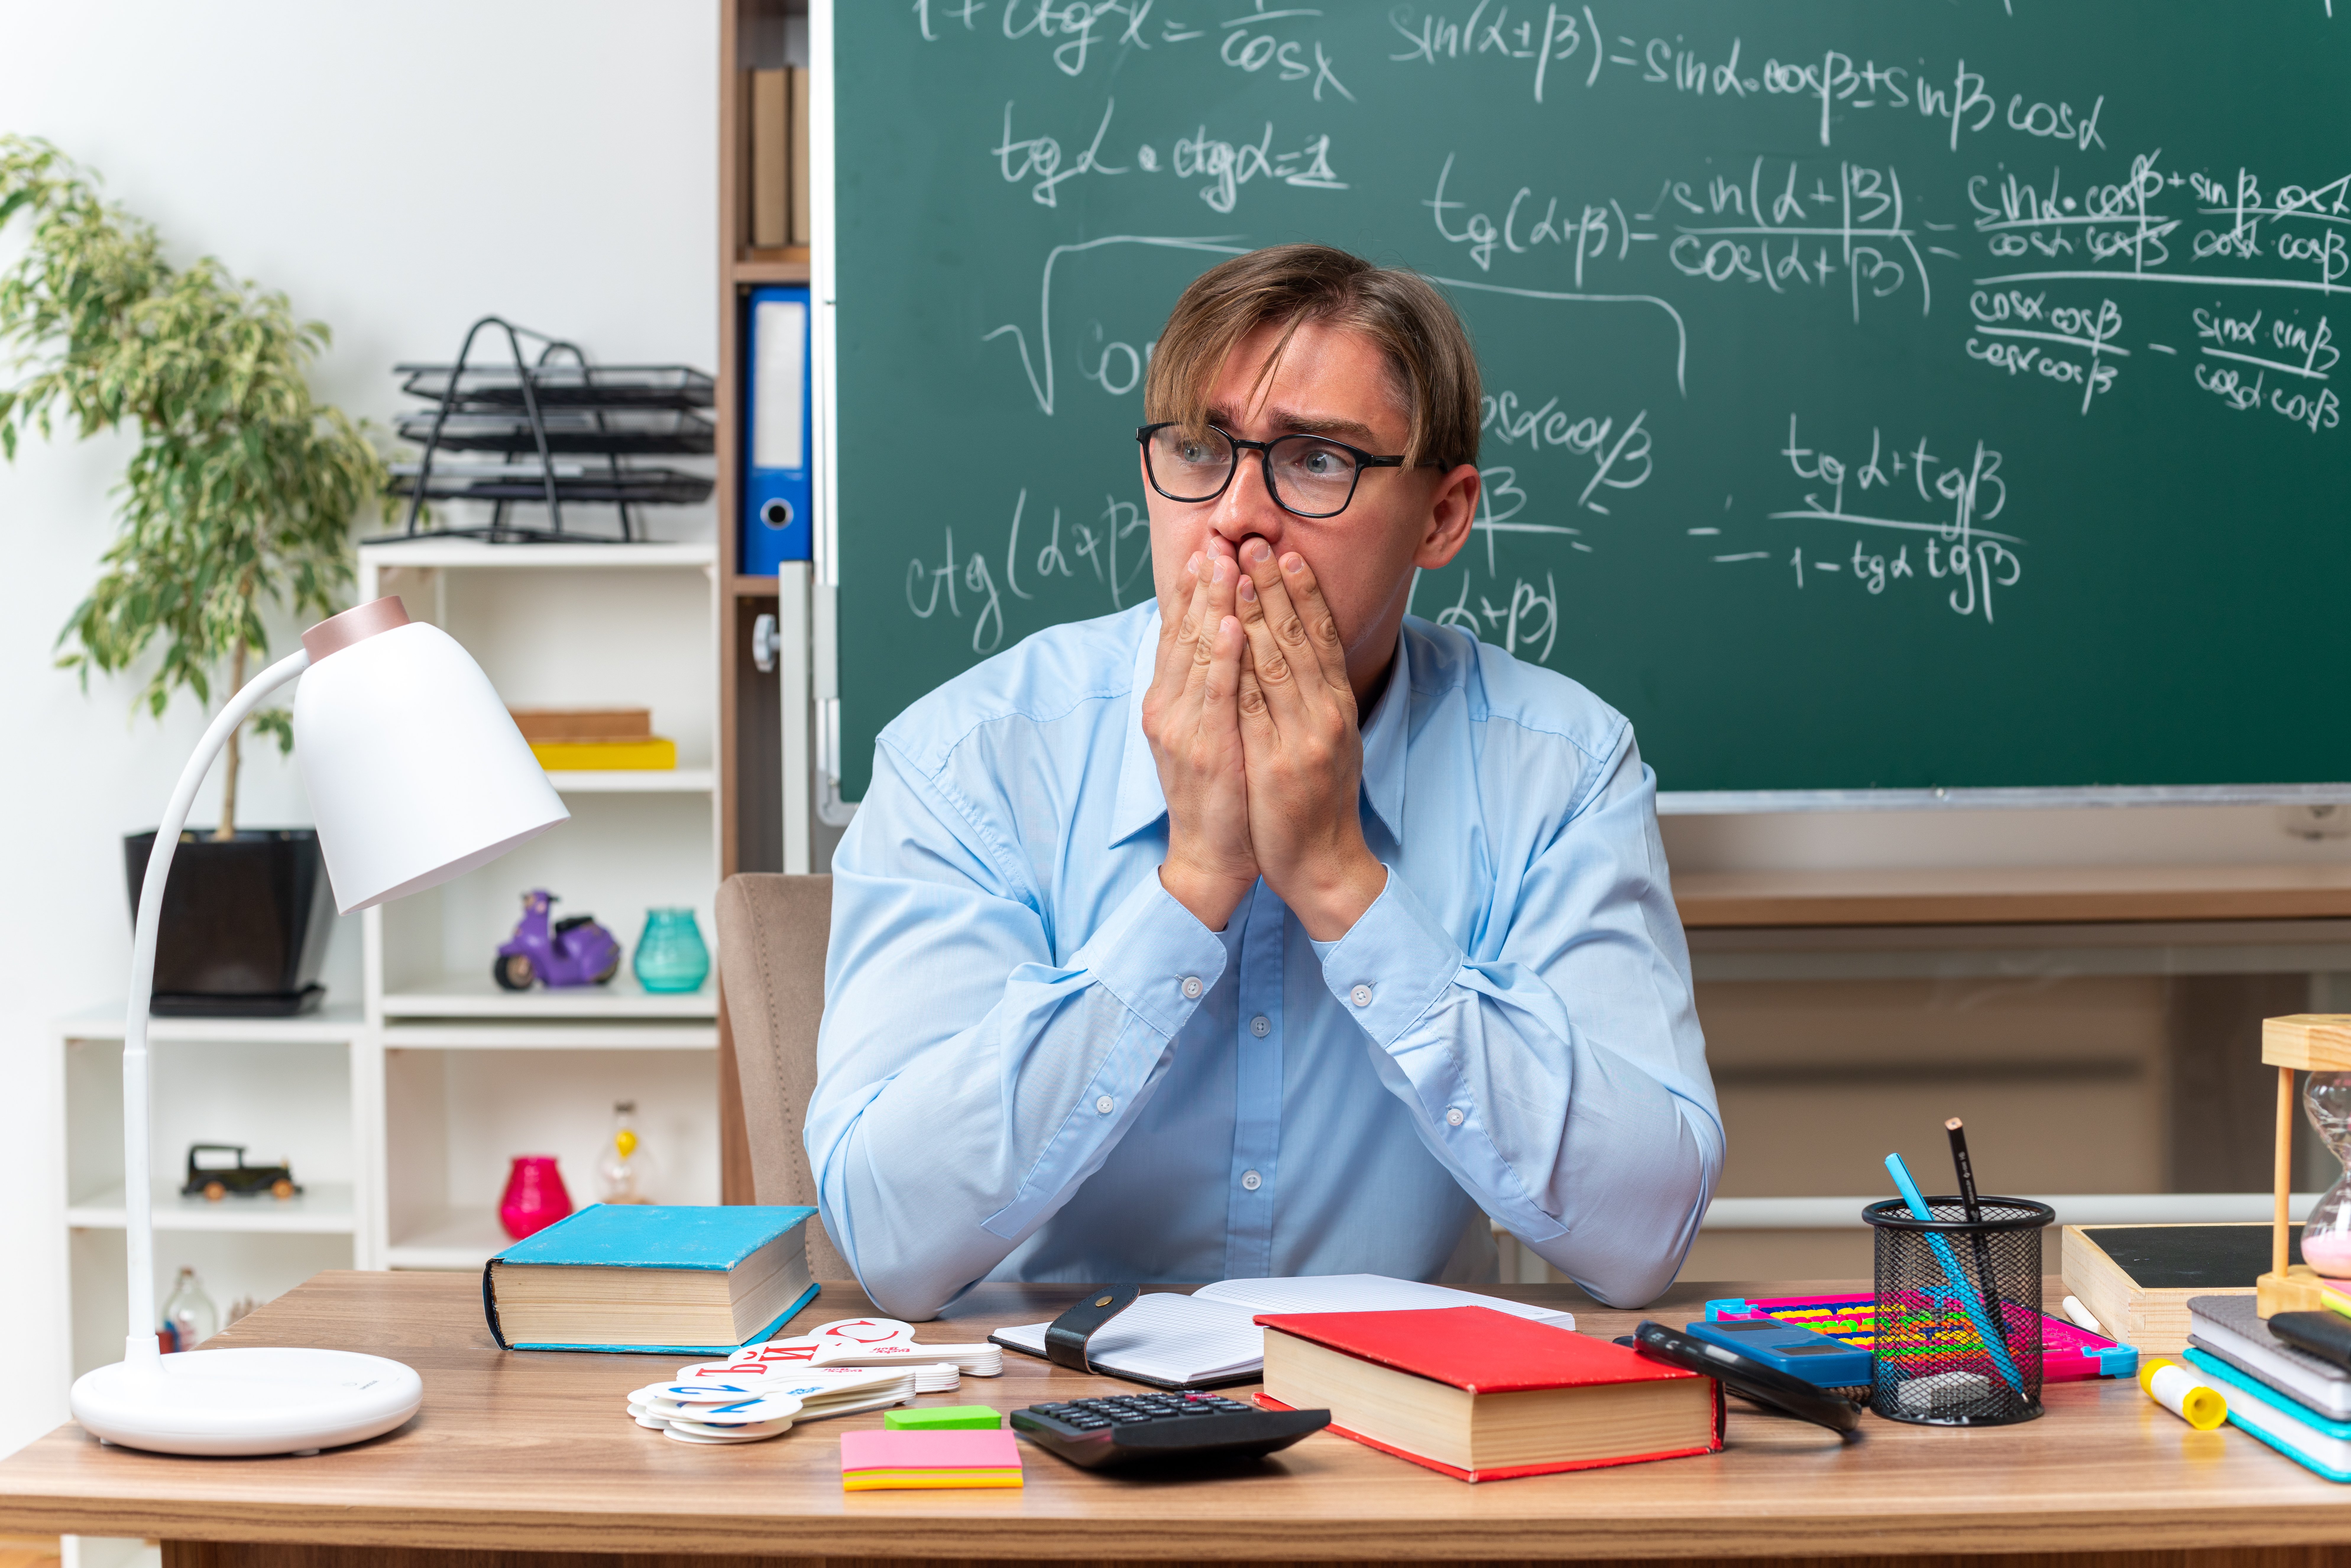 young-male-teacher-wearing-glasses-looking-aside-stressed-nervous-covering-mouth-with-hands-sitting-school-desk-with-books-notes-front-blackboard-classroom